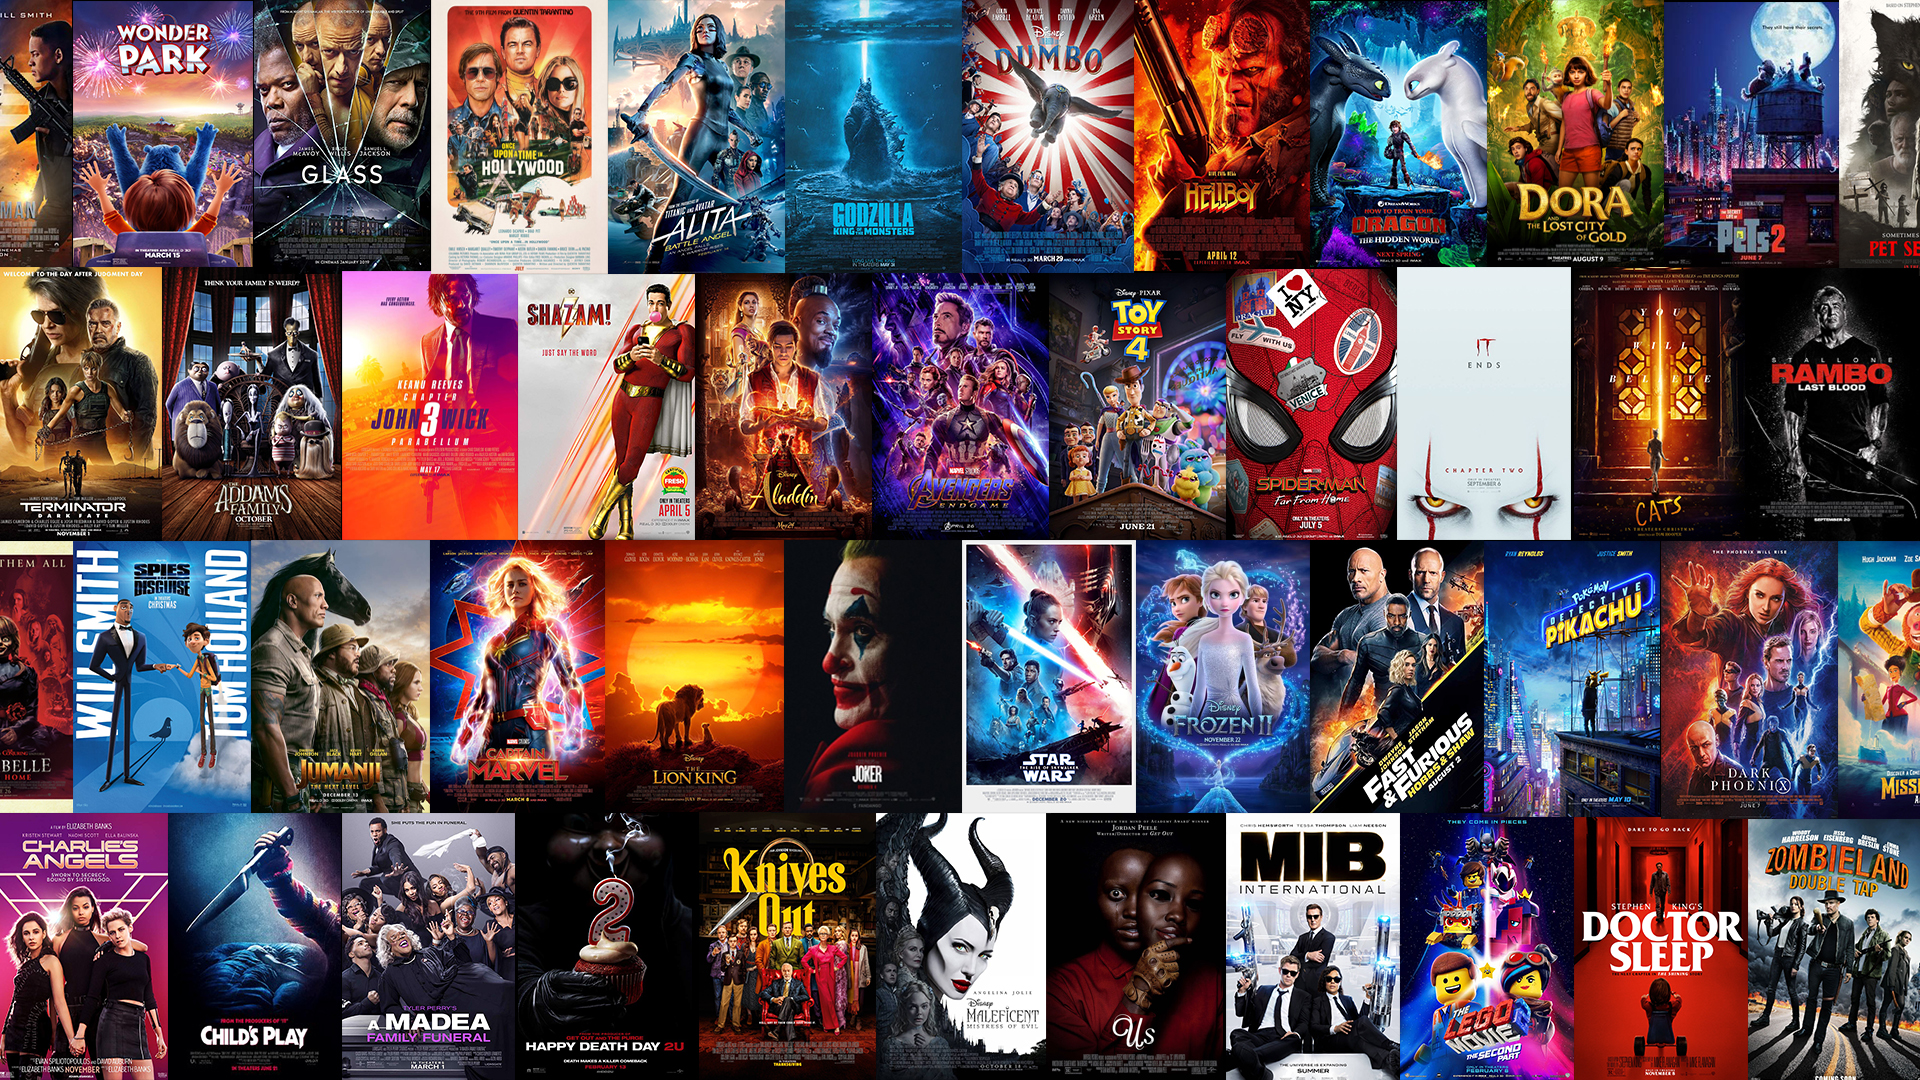 Pin by Vi Mtmrnh on Filmes  Full films, Movies now playing, Movies 2019